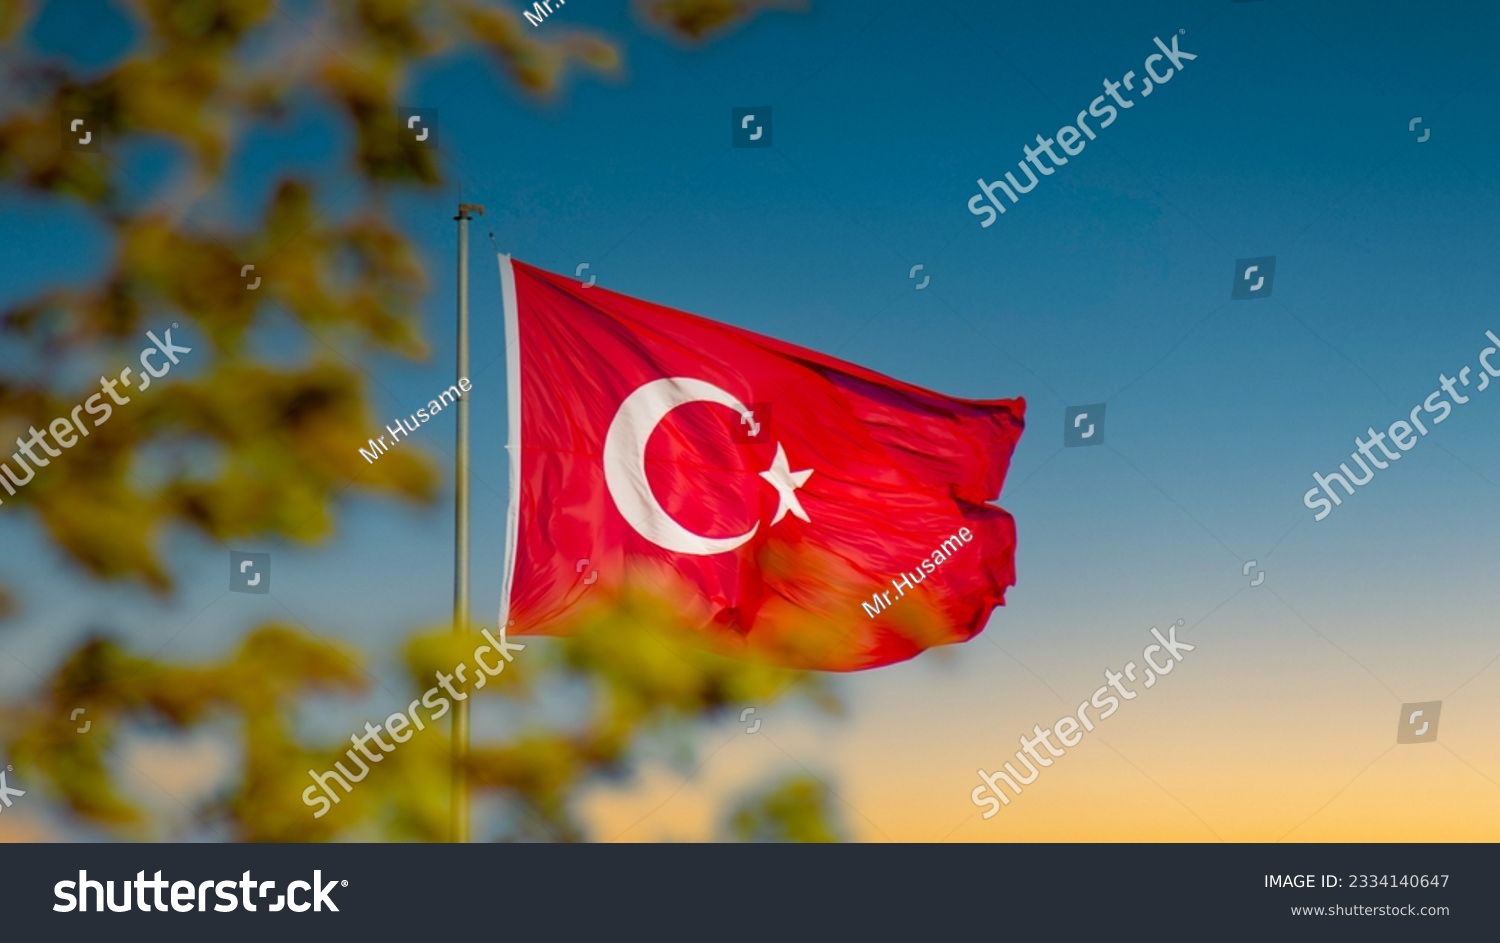 30th august victory day of Turkey or 30 agustos zafer bayrami background and Turkish flag  #2334140647